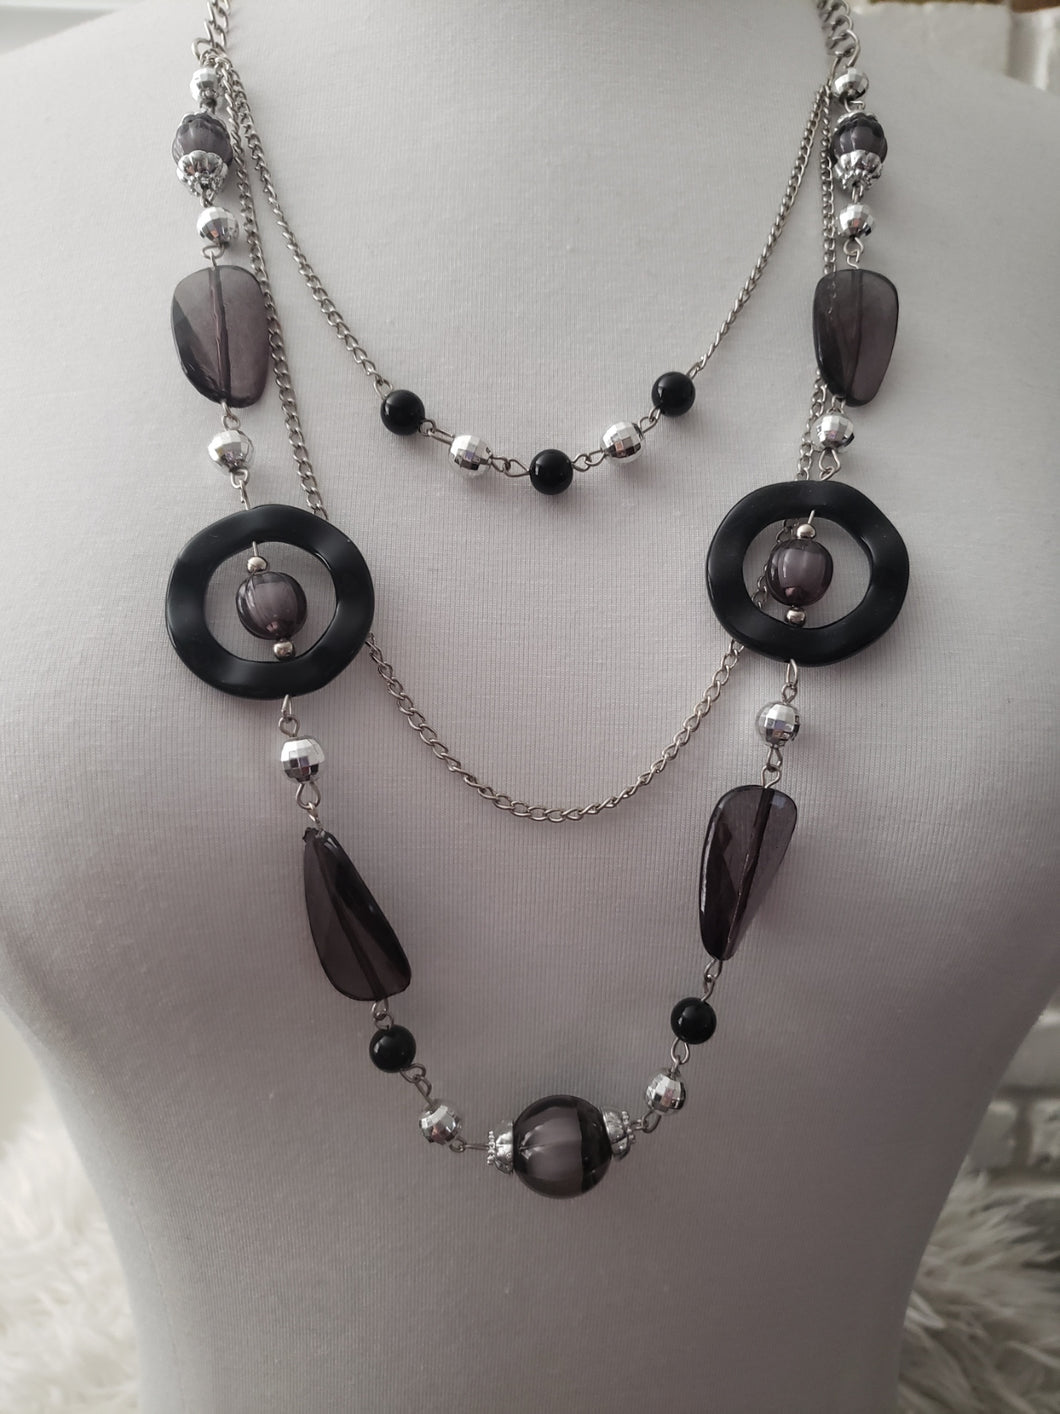 3 Layer Multiple Shape Black Necklace with Small Black and Silver Color Beads